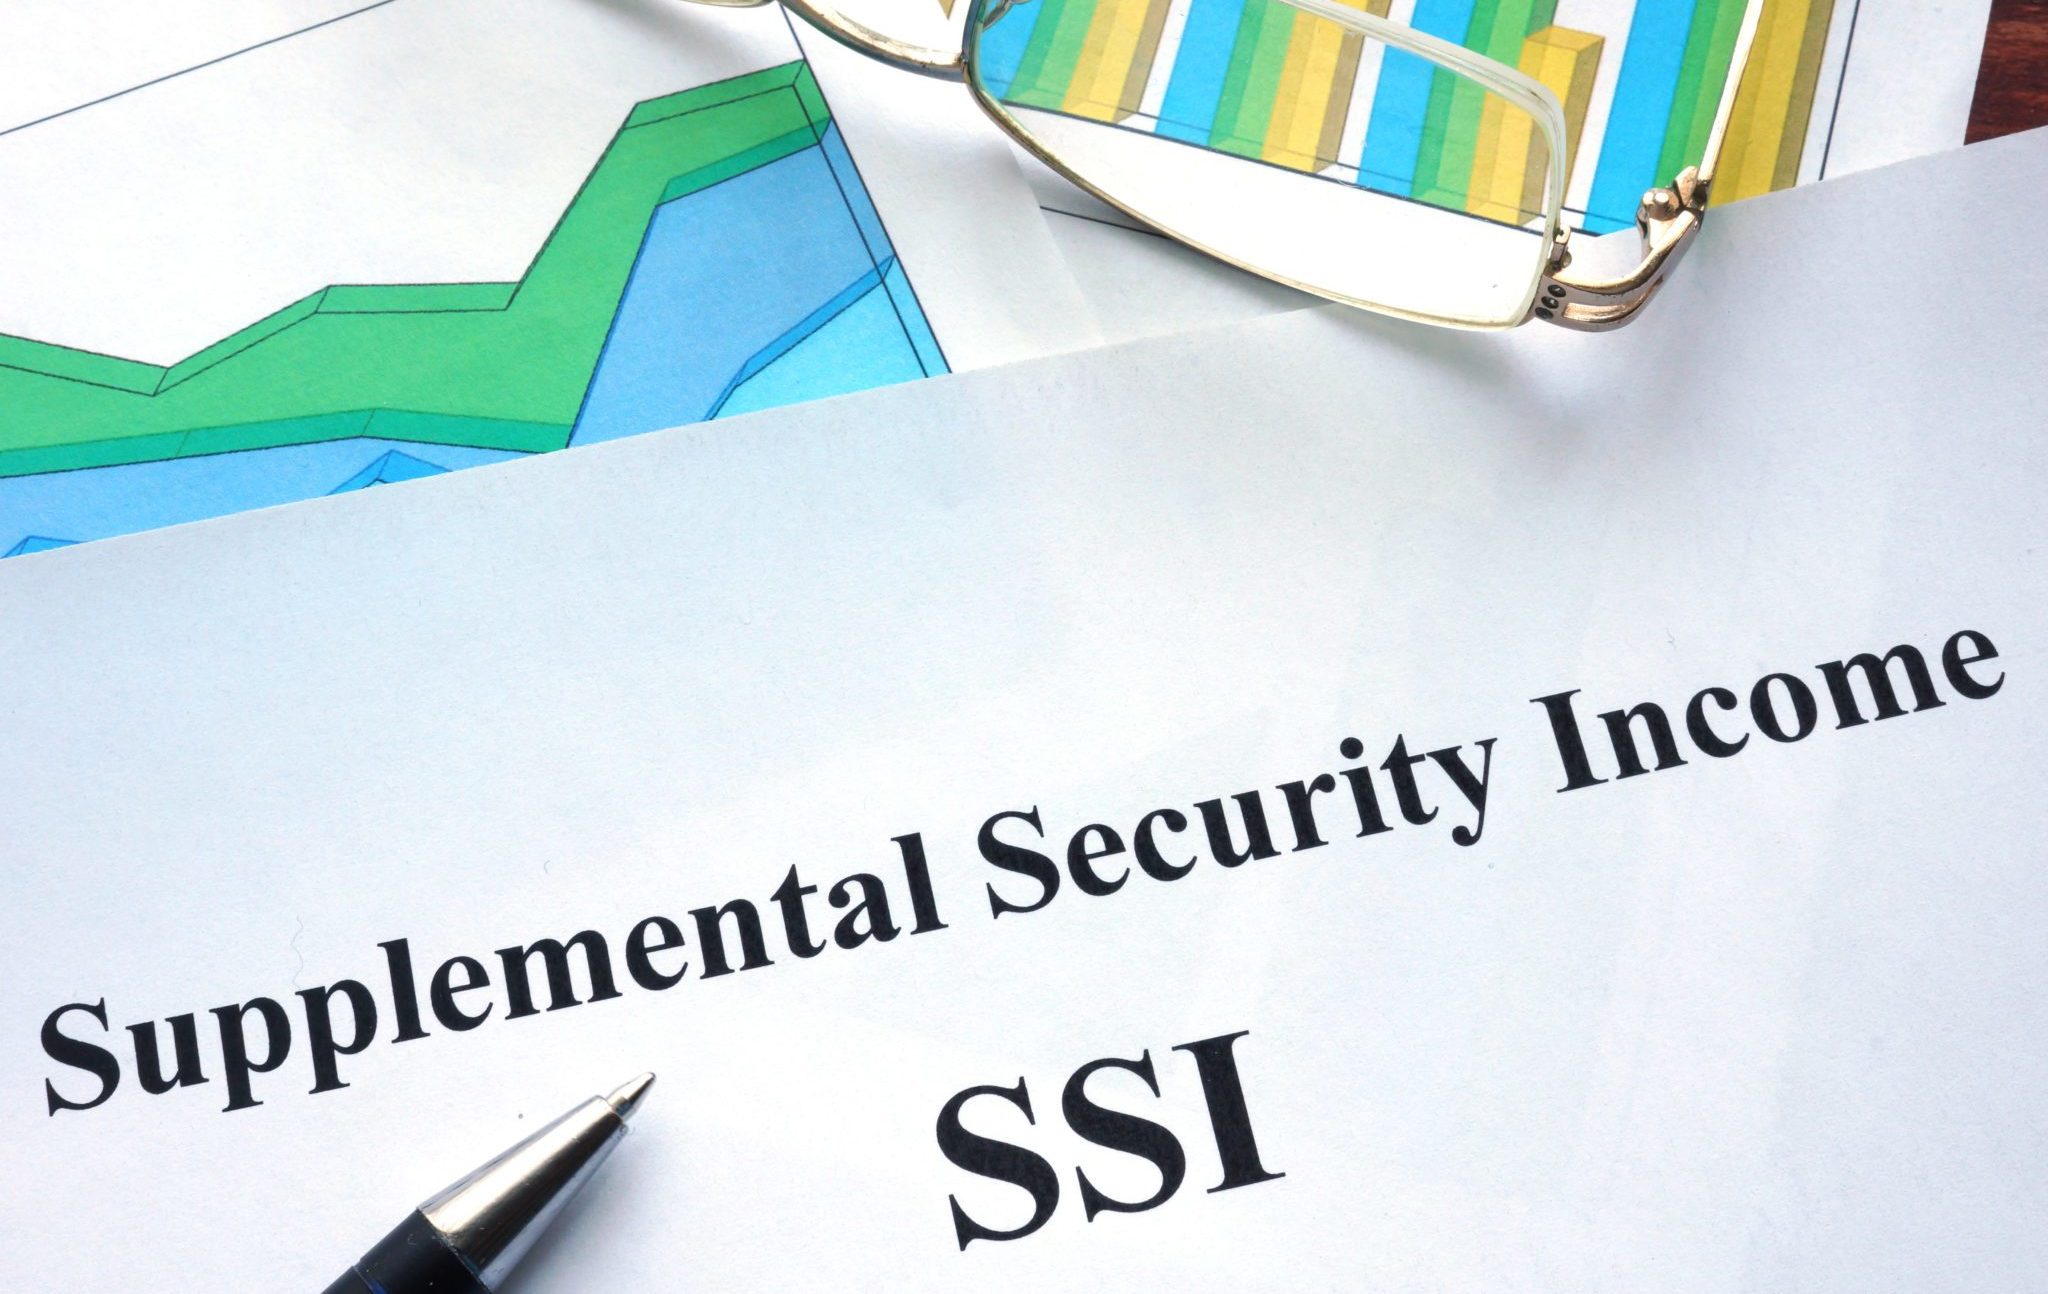 Supplemental,Security,Income,(ssi),Written,On,A,Paper.